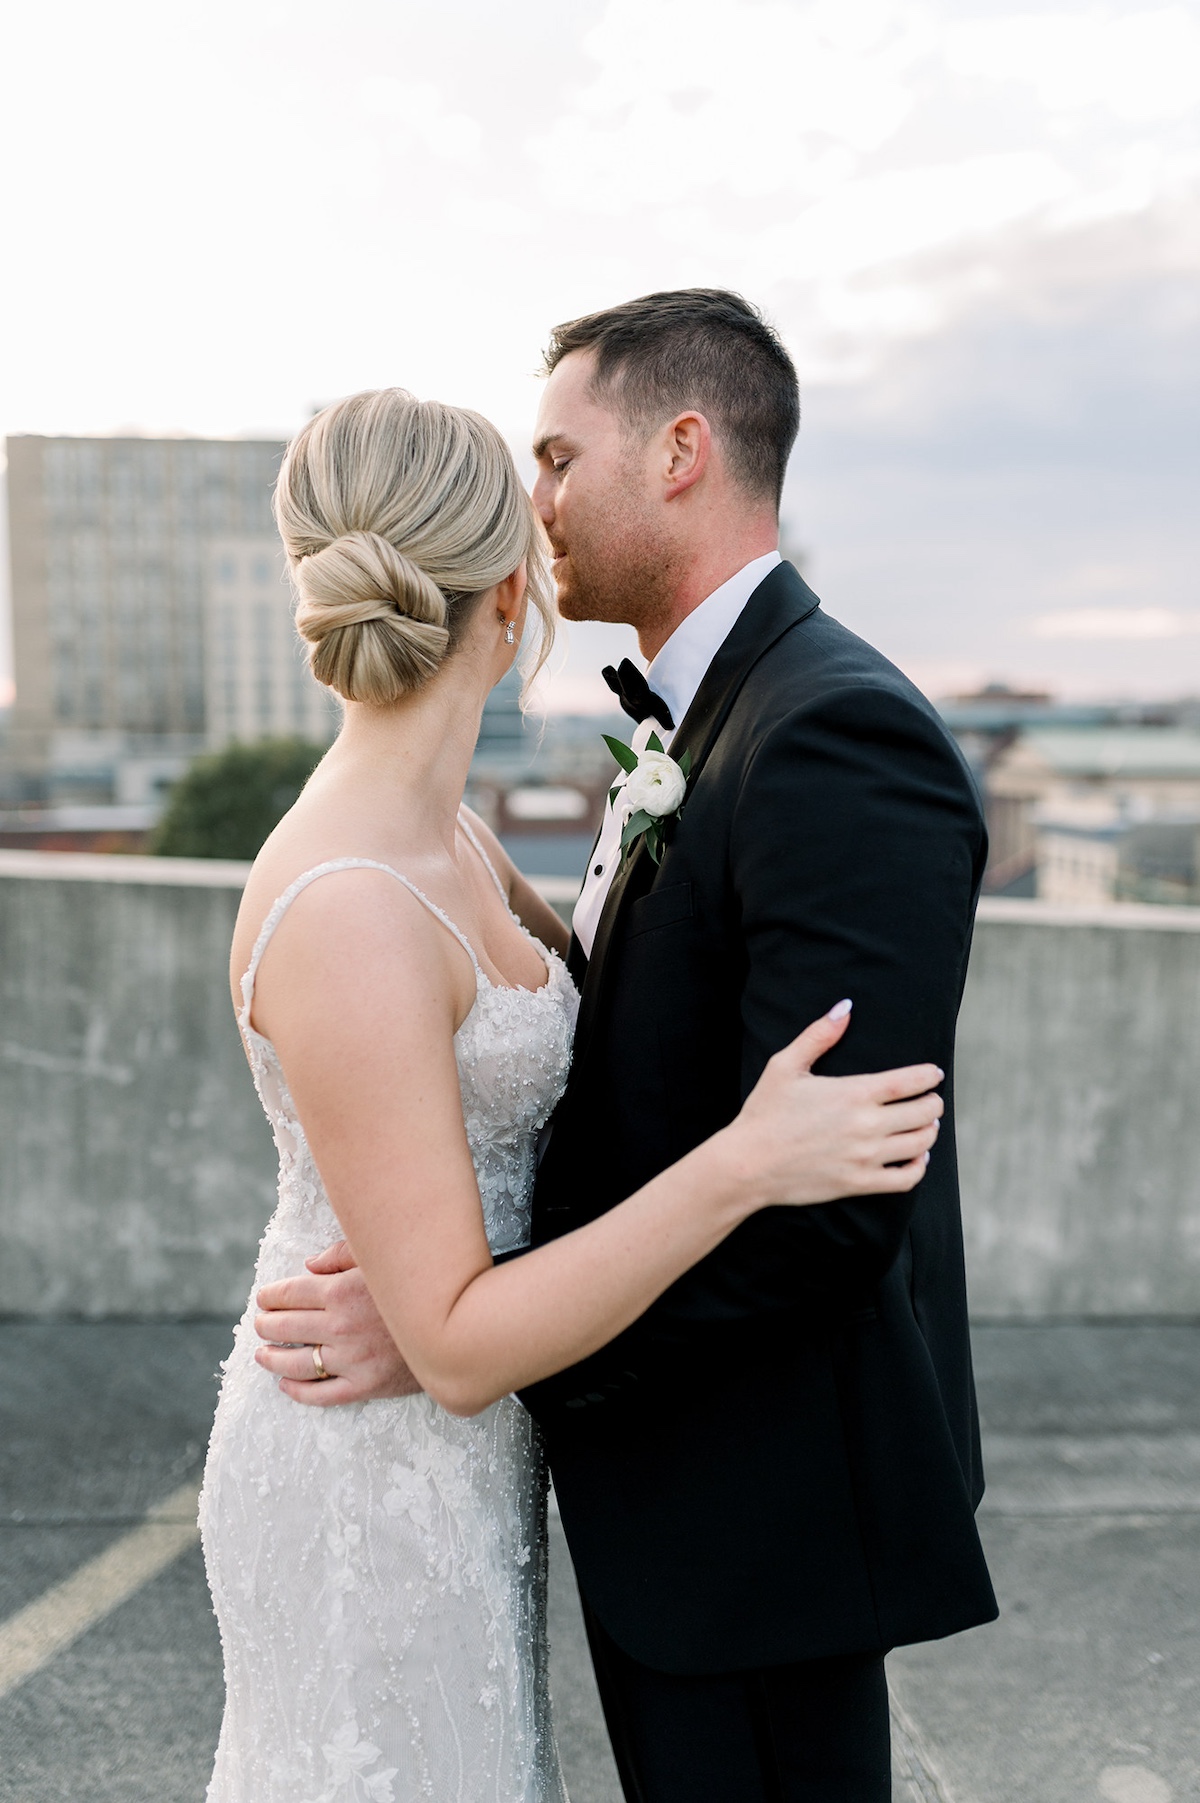 Kelly and Adam share a romantic dance under the Lancaster City sunset, a moment of pure love and joy.